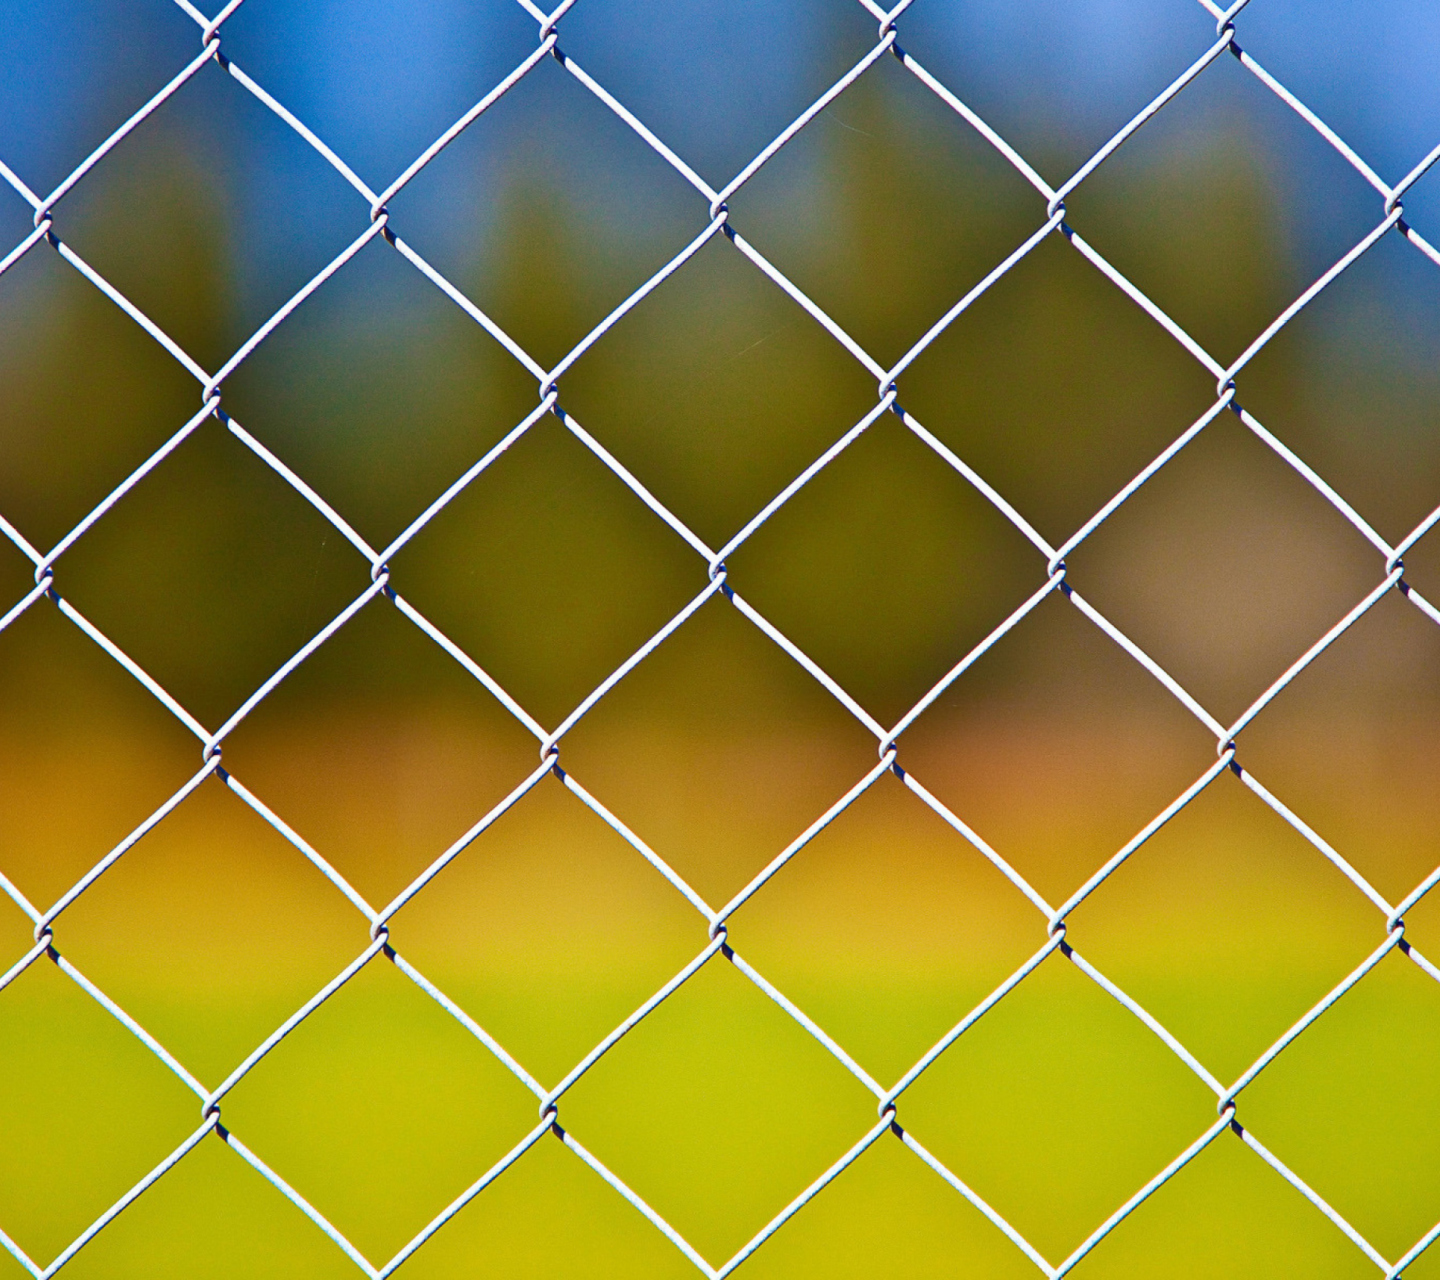 Cage Fence wallpaper 1440x1280